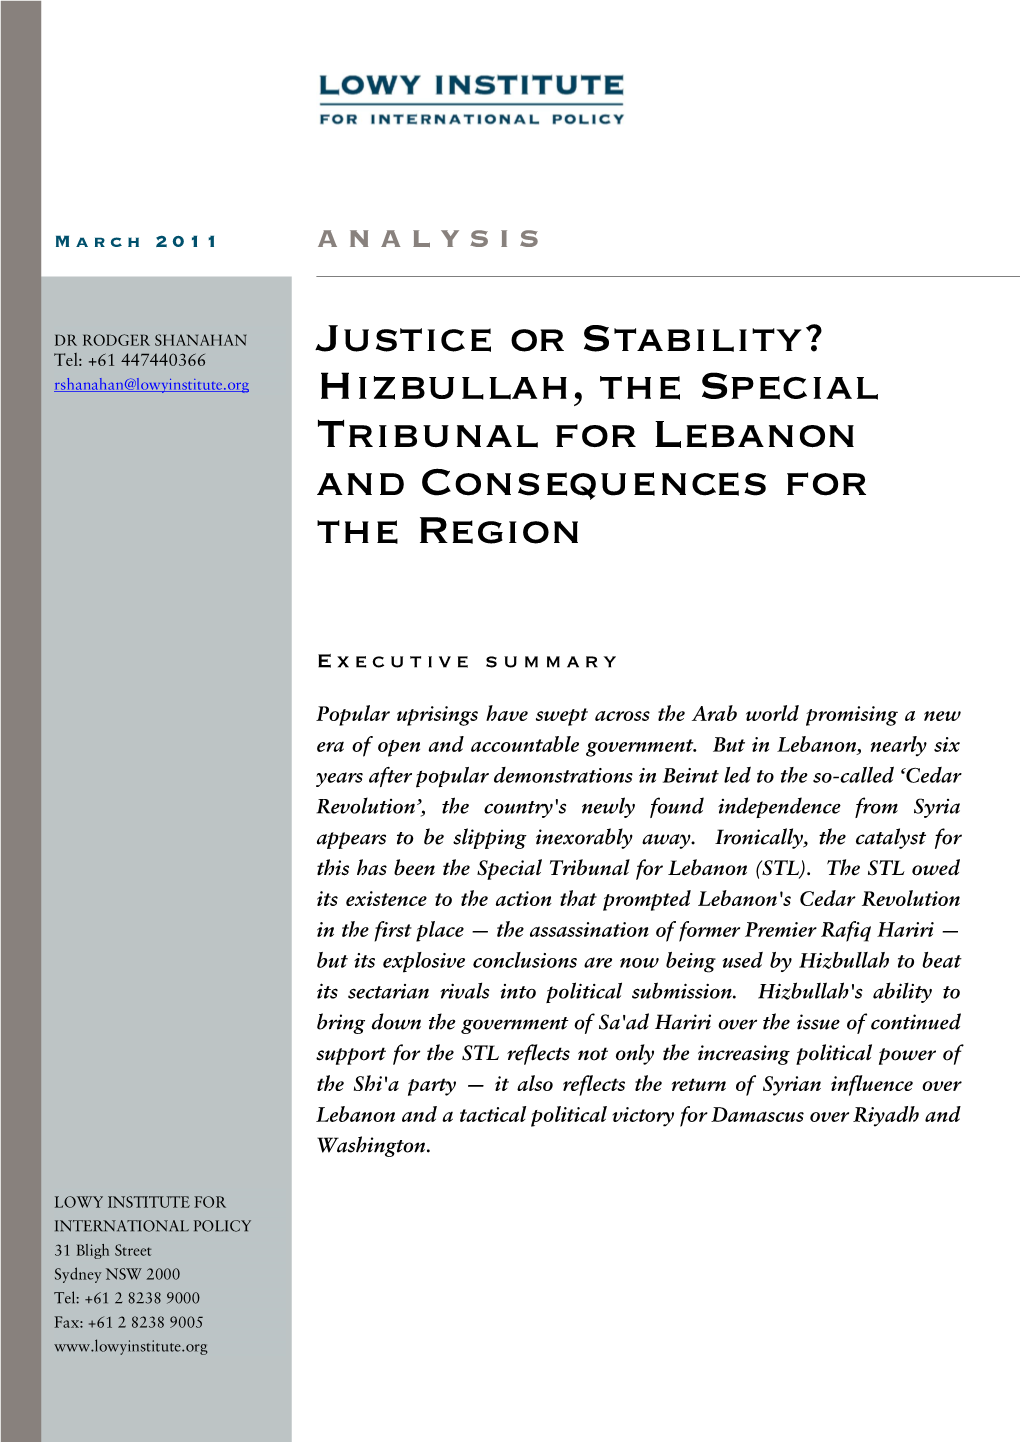 Justice Or Stability? Hizbullah, the Special Tribunal for Lebanon And